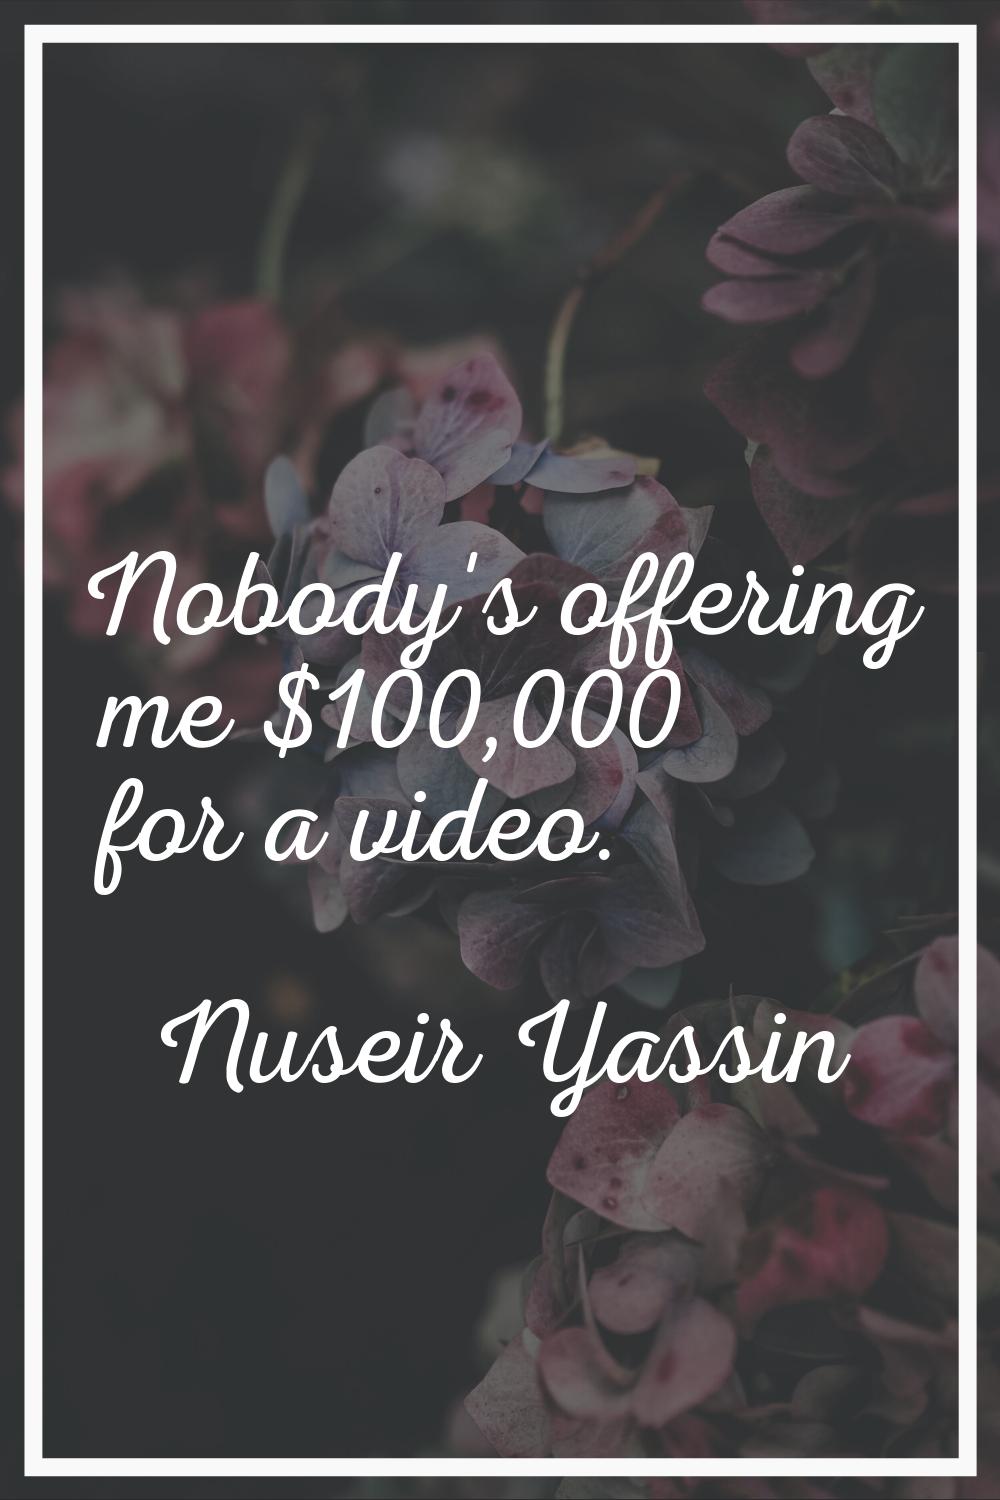 Nobody's offering me $100,000 for a video.